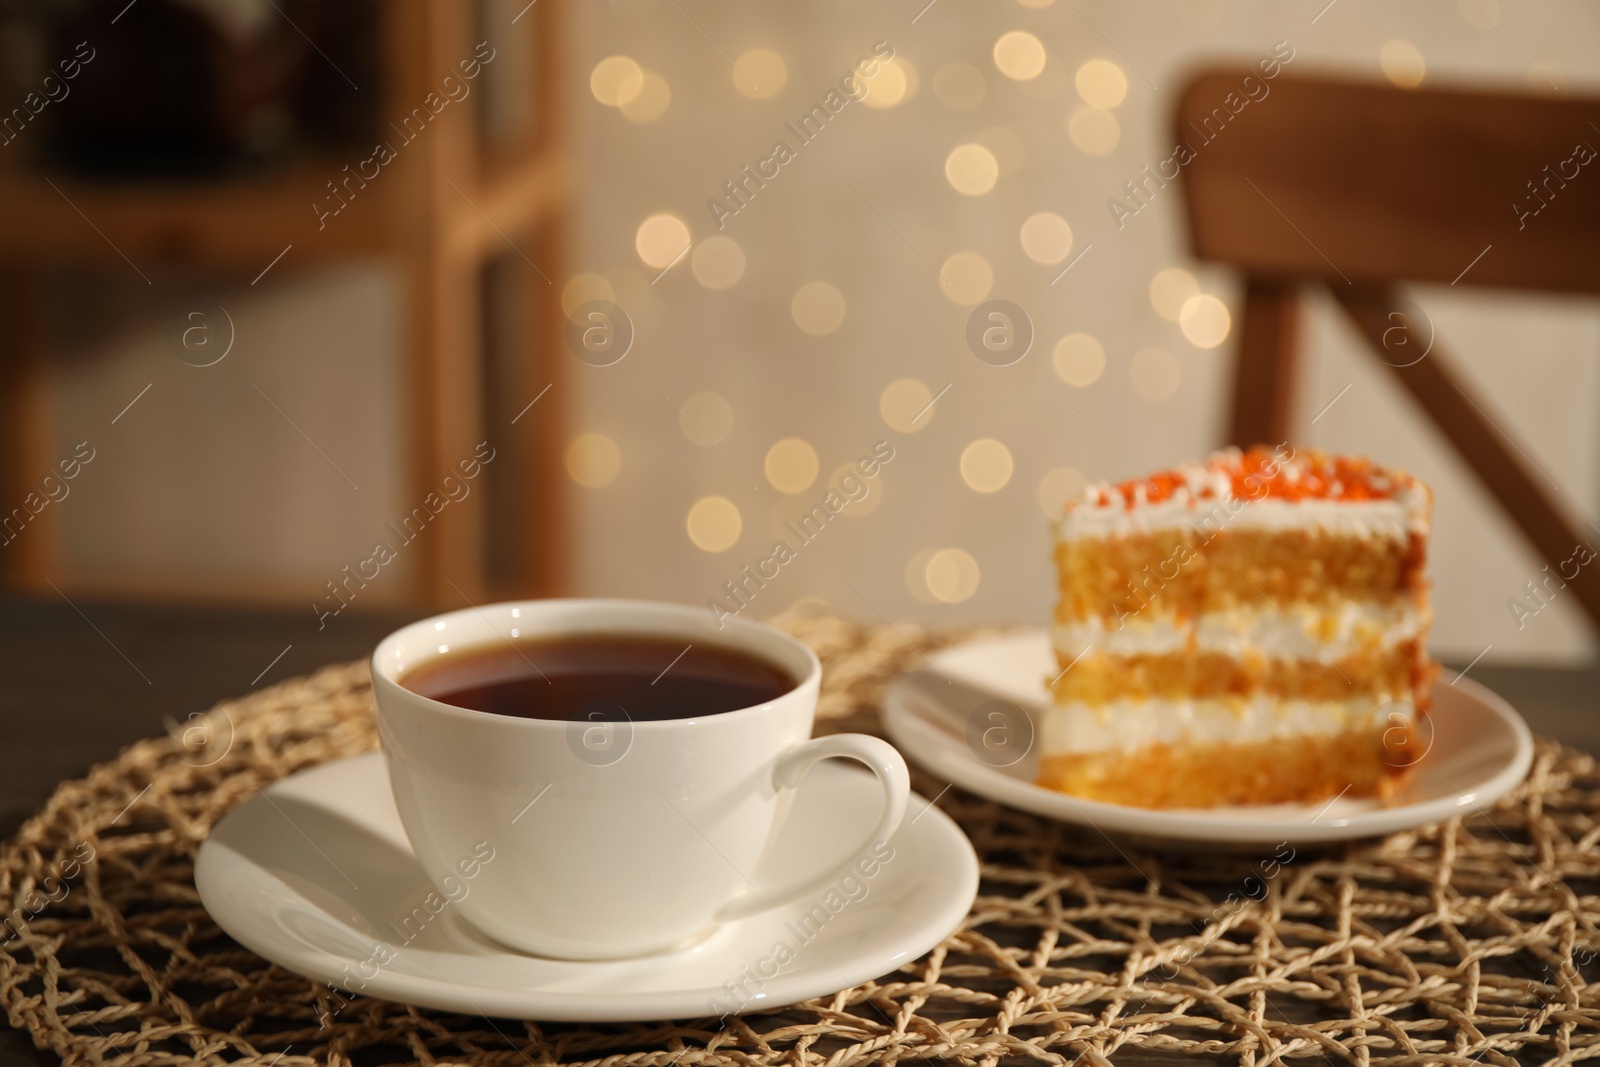 Photo of Hot tea in cup and piece of cake on wooden table against blurred lights indoors